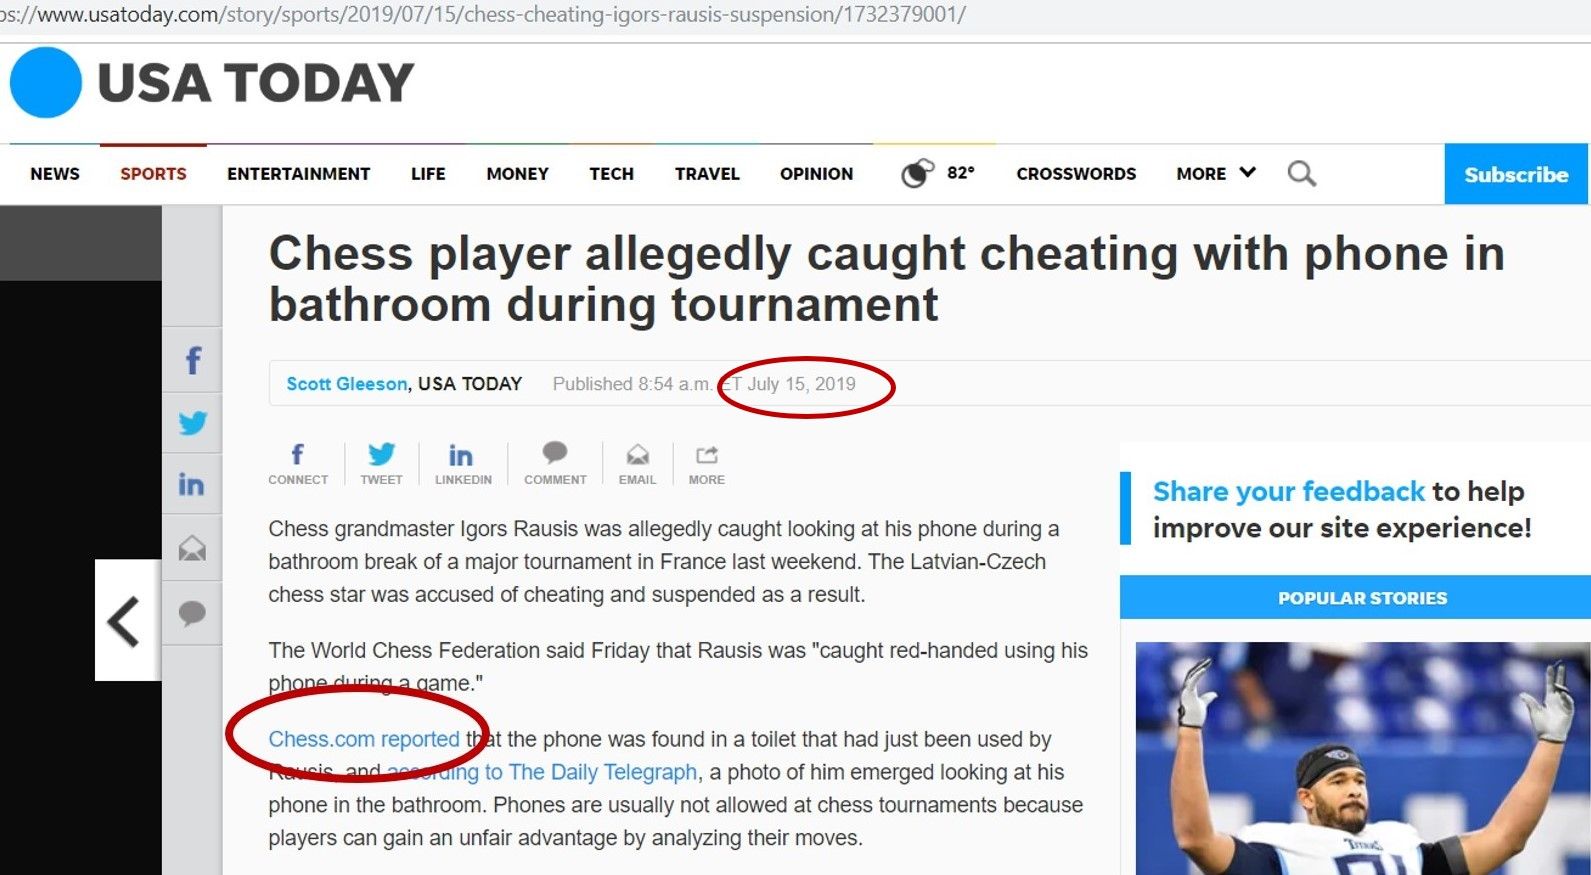 New 'Toiletgate' Cheating Accusation Refuted - The Chess Drum